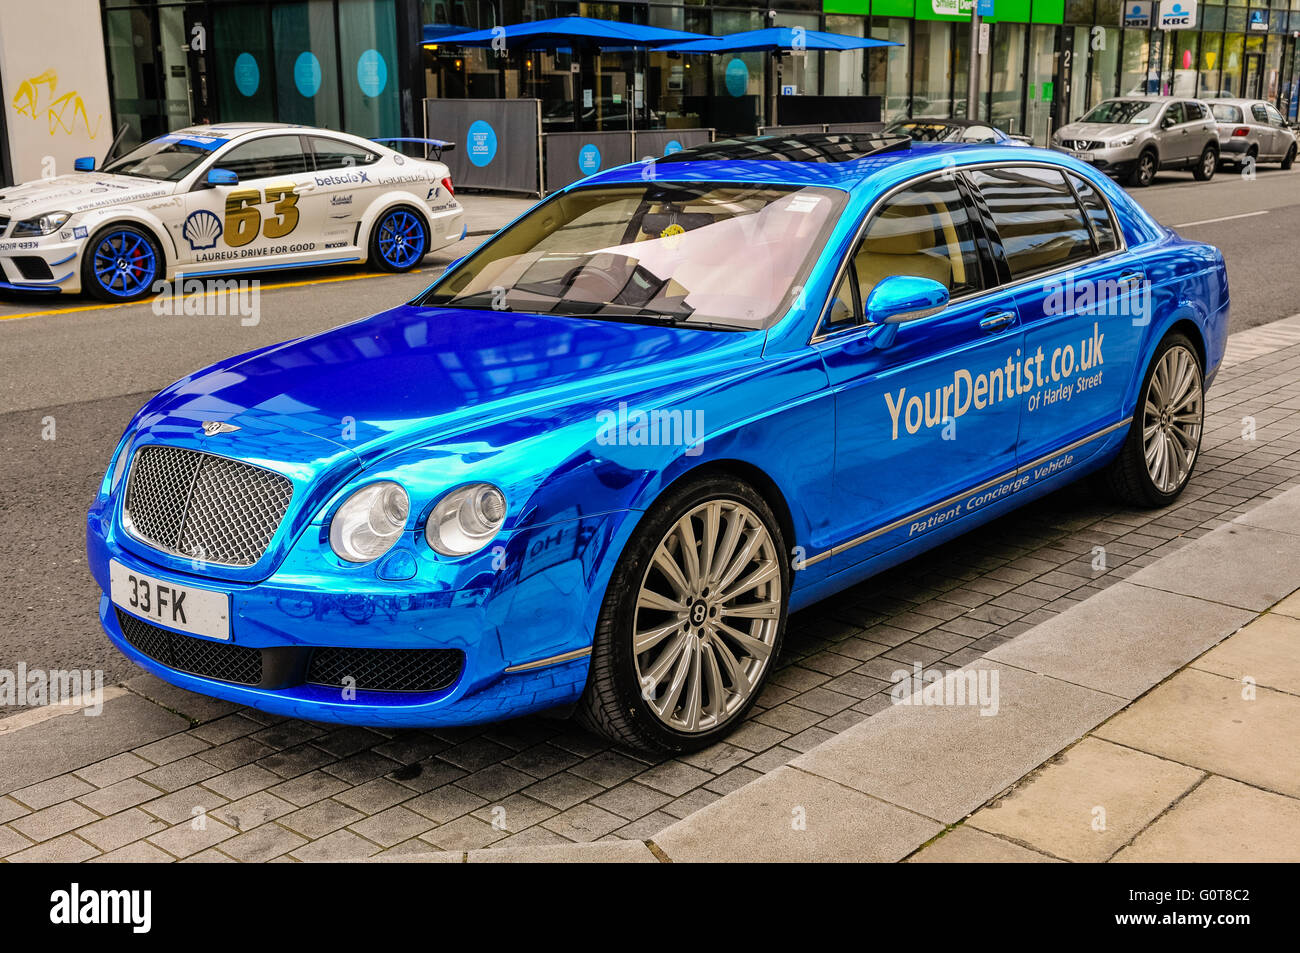 A Bentley Flying Spur with blue mirrored paint, concierge vehicle for YourDentist.co.uk of Harley Street Stock Photo